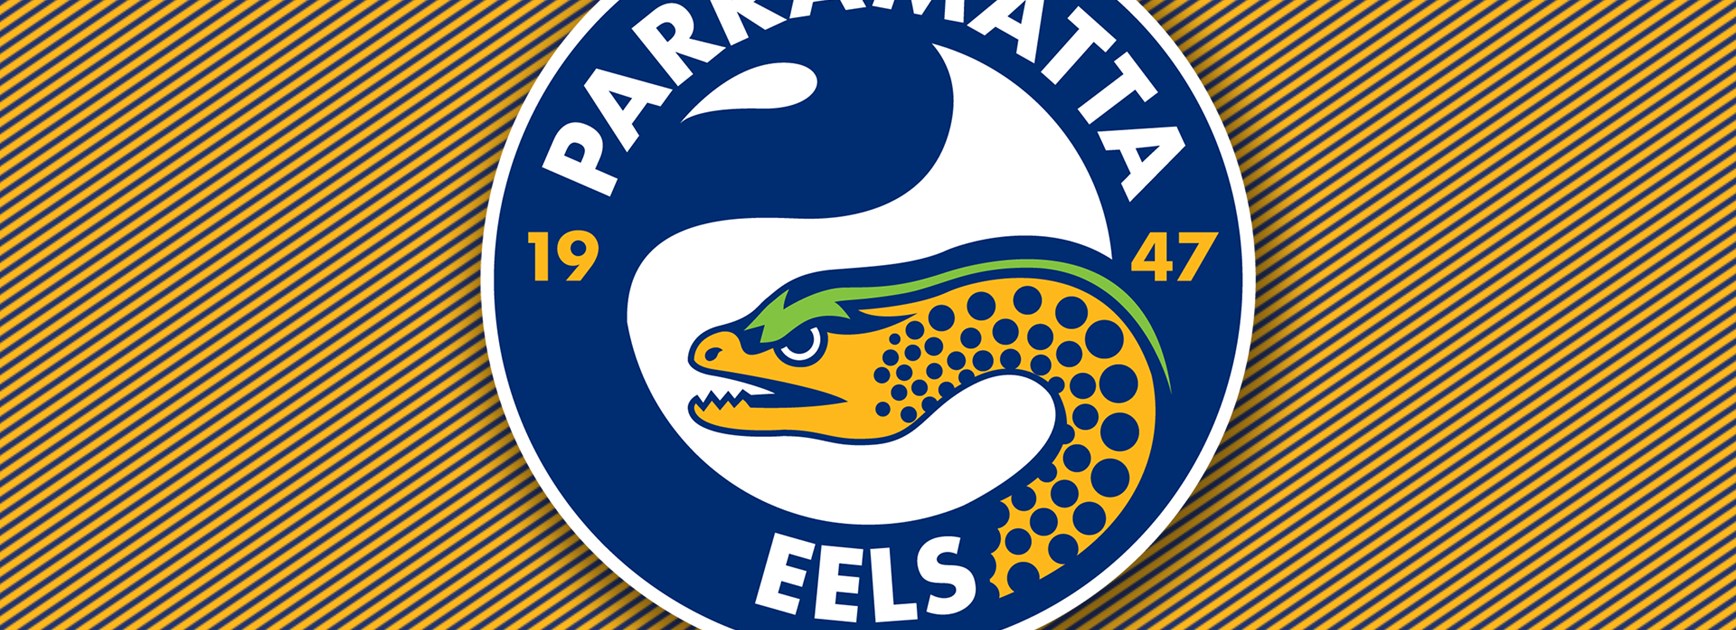 Anthony Shiner to step down from the Parramatta Eels Board